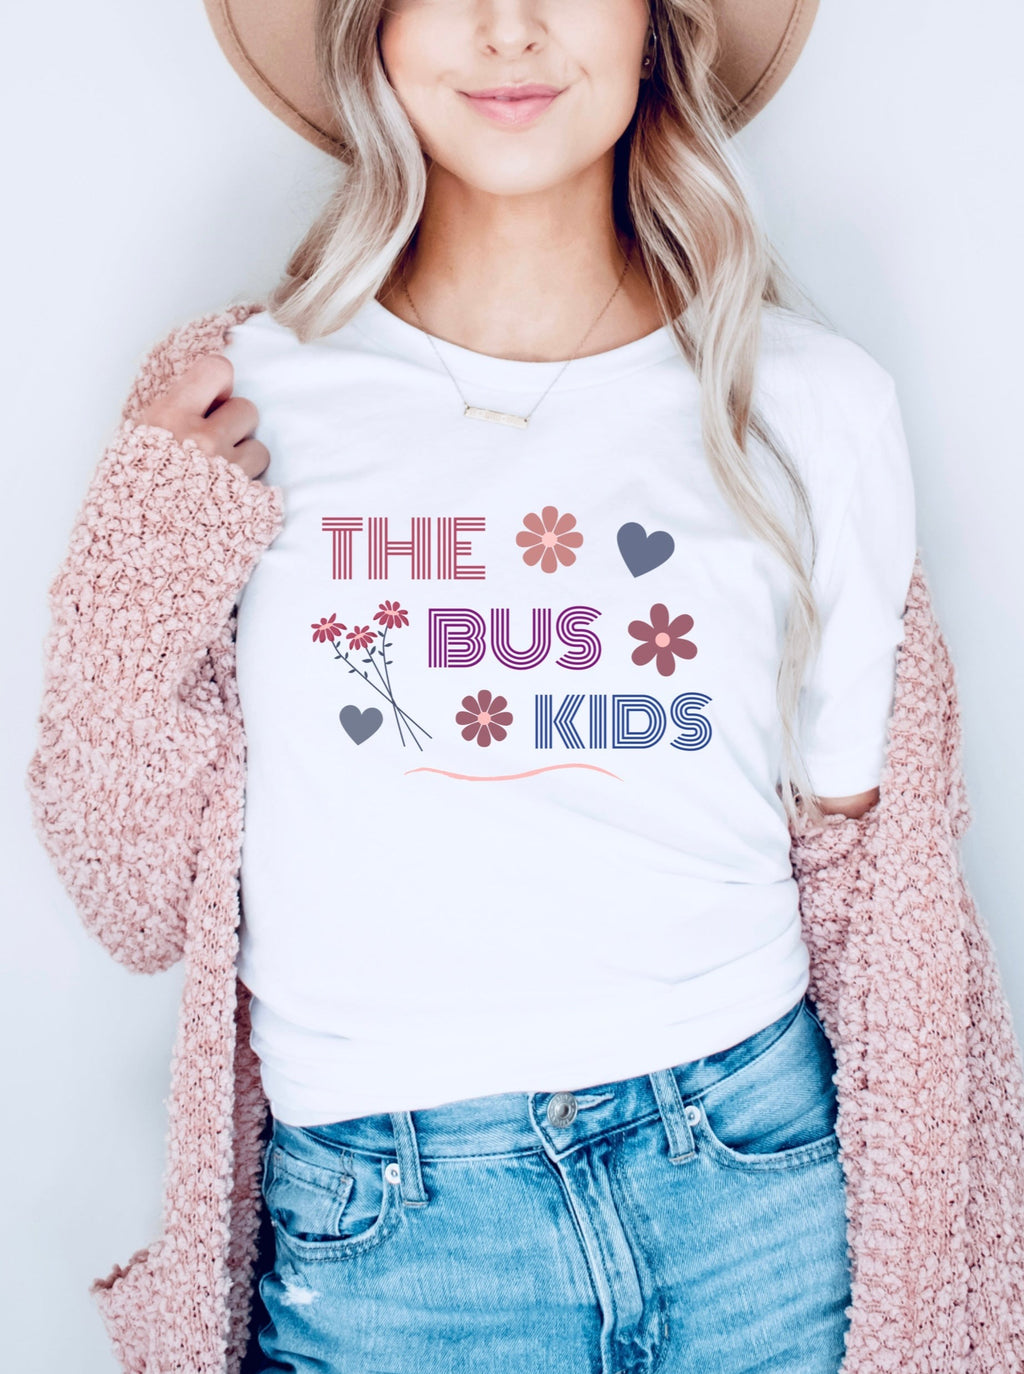 Marvel’s Agents of SHIELD The Bus Kids T-shirt